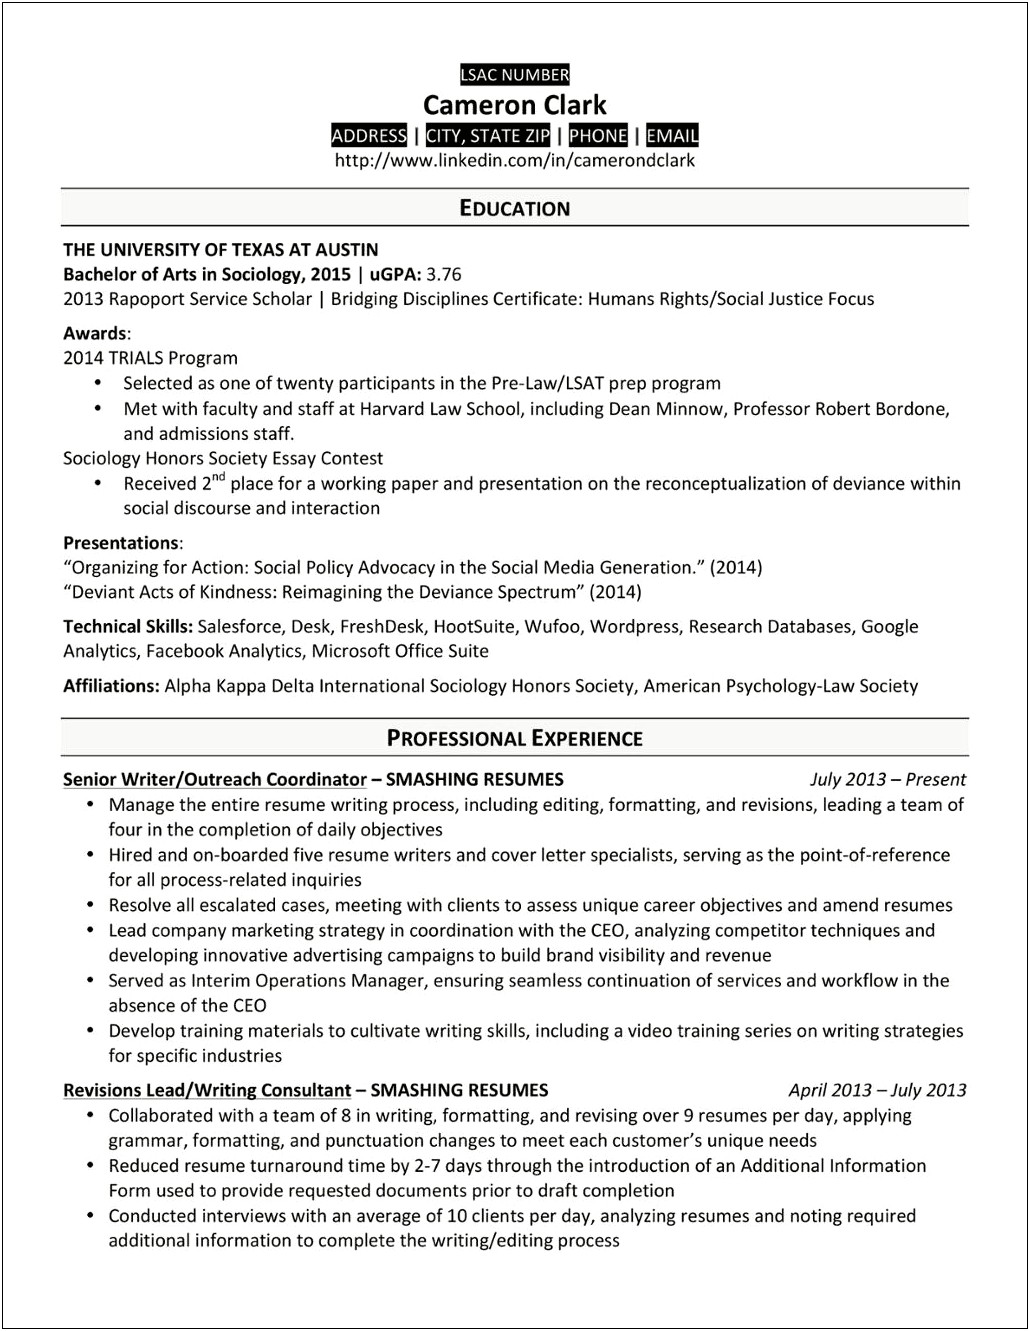 Example Resume Objective Statement For Criminal Justice Graduate